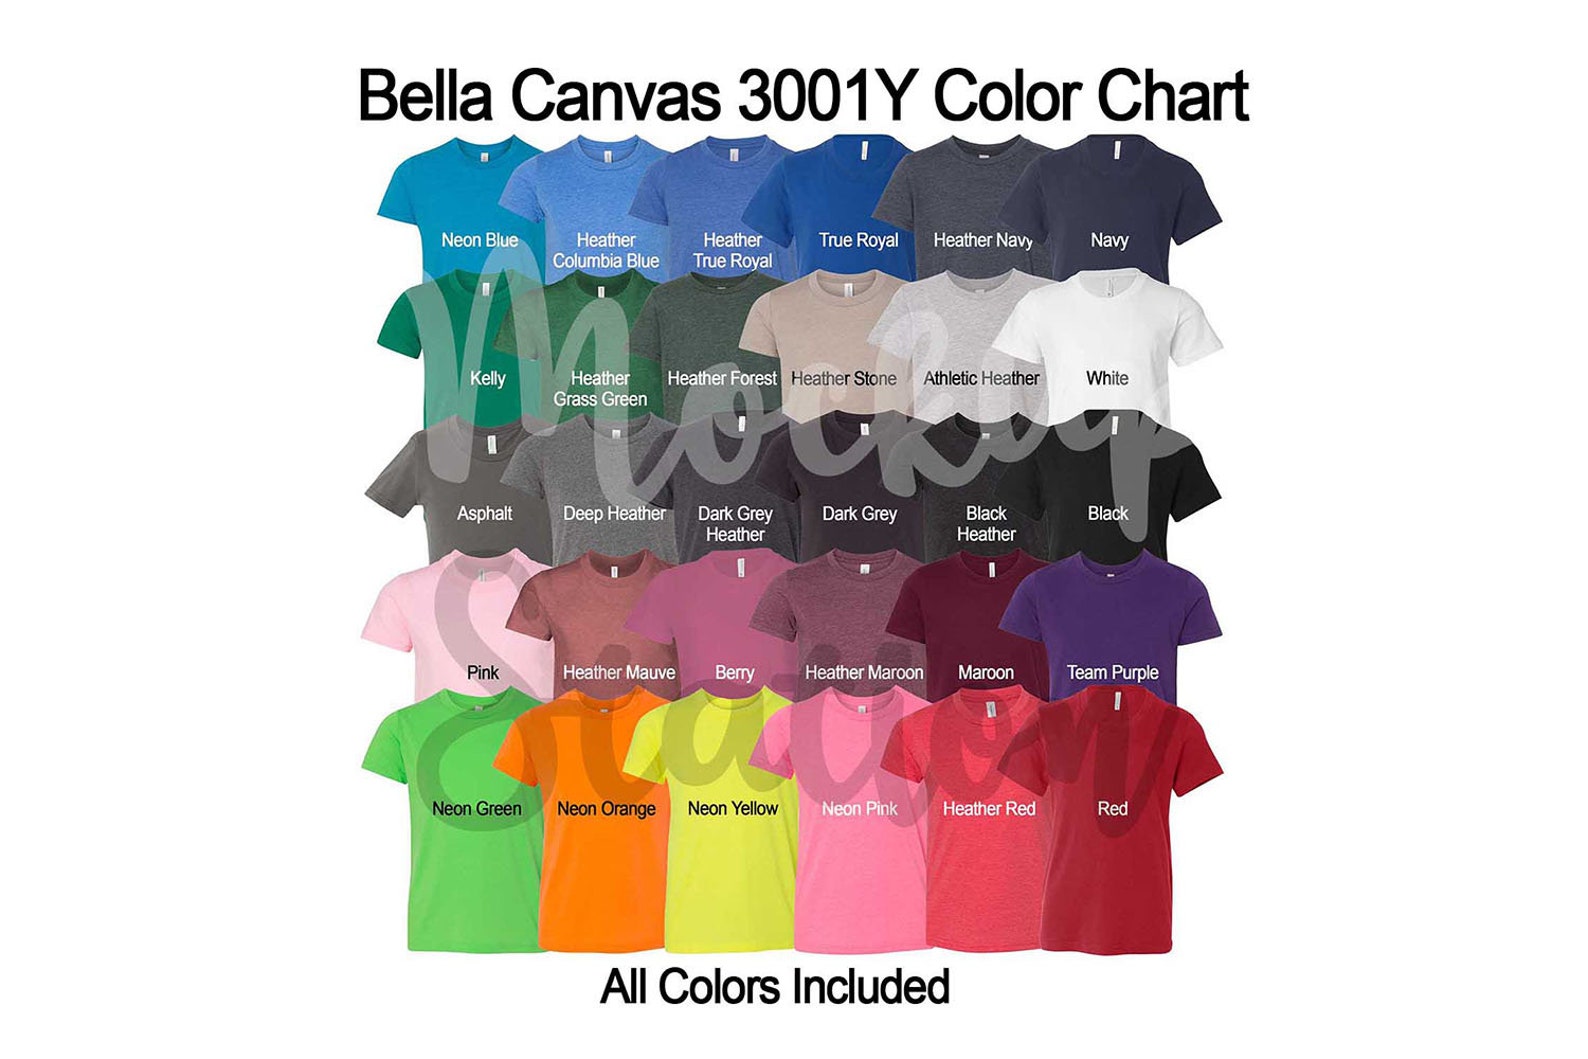 Color Chart for Bella Canvas 3001Y T-shirt Template Digital | Etsy